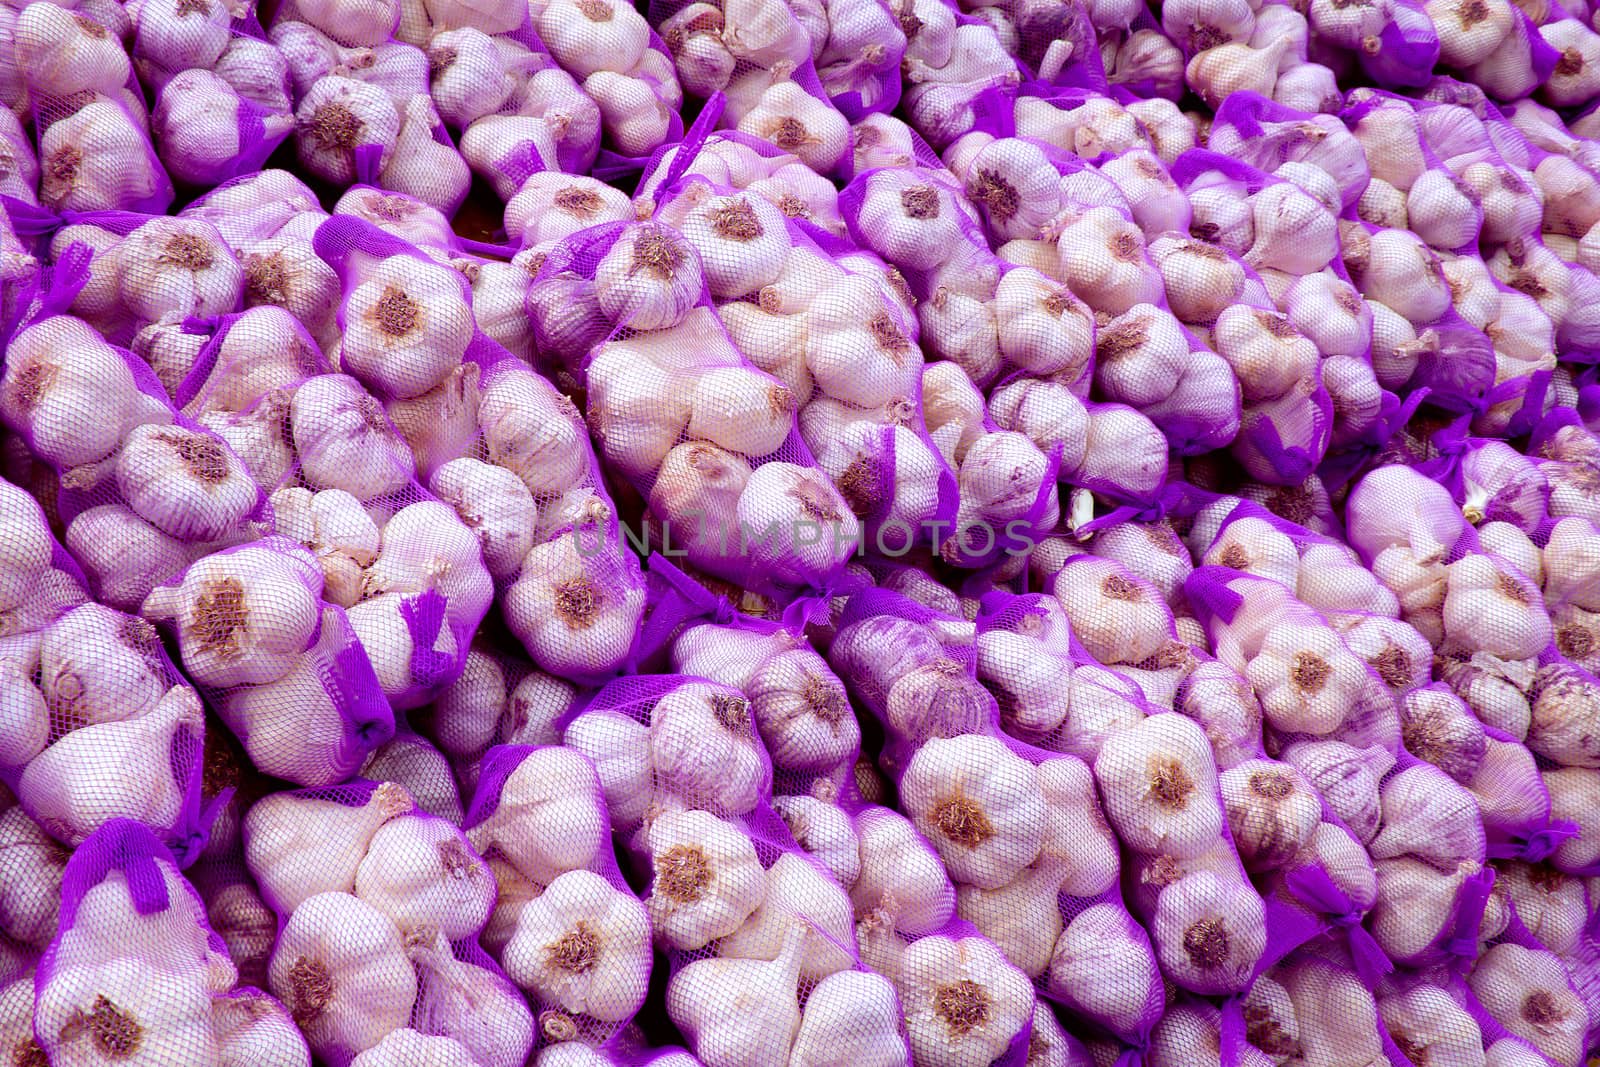 Garlic for sale by KGM